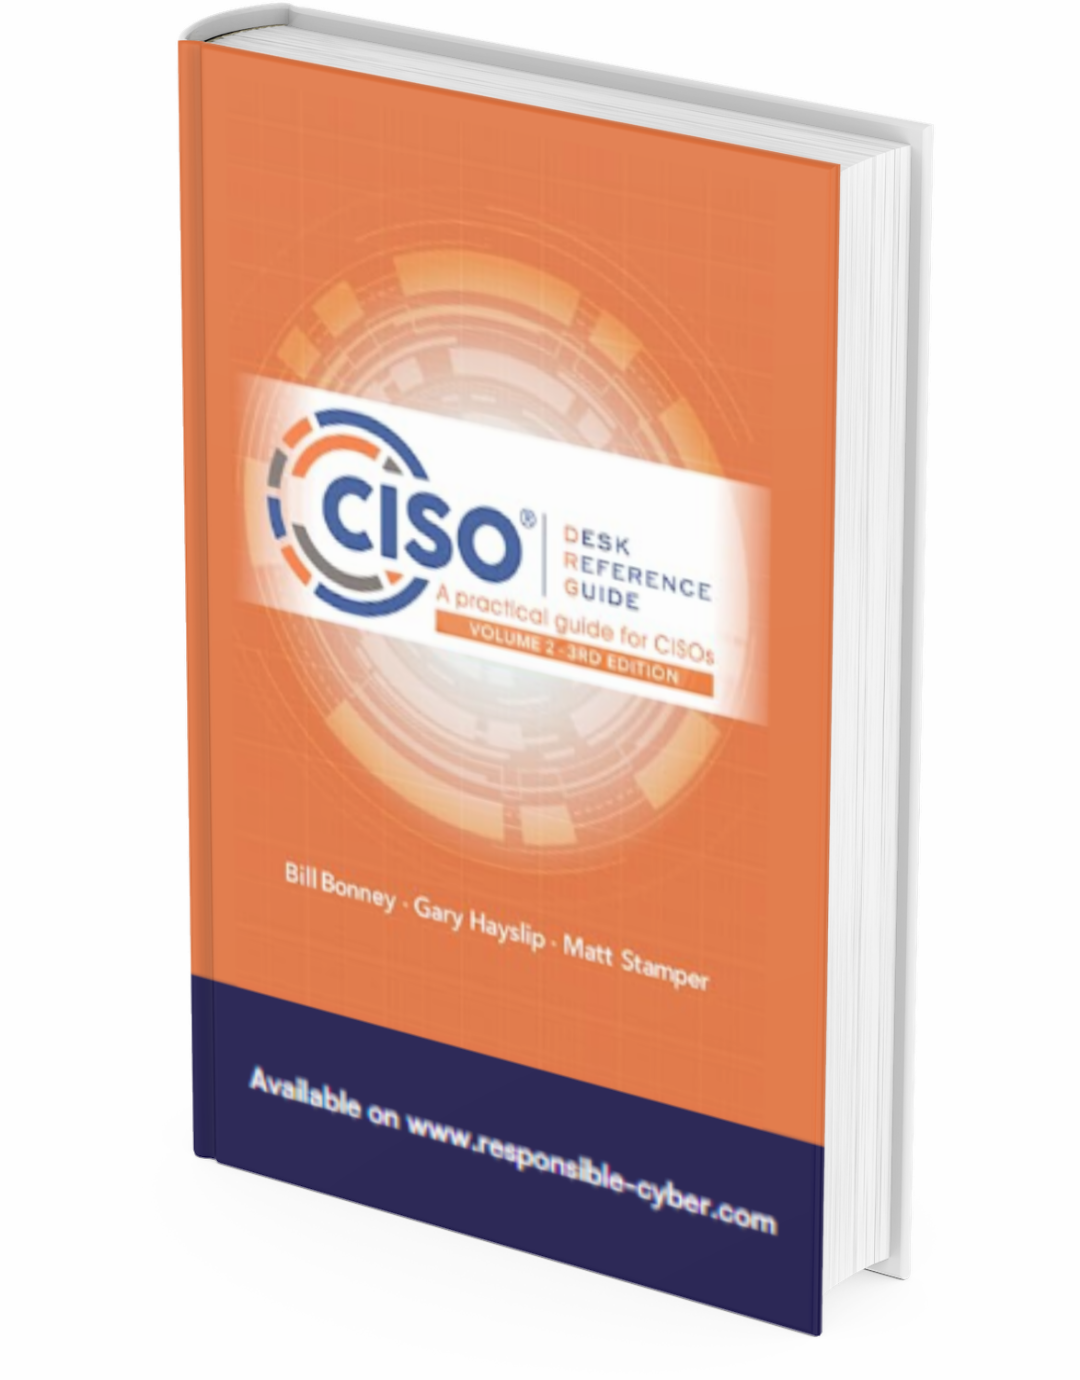 CISO Desk Reference Guide: A Practical Guide for CISOs Volume 2 Paperback – July 5, 2023